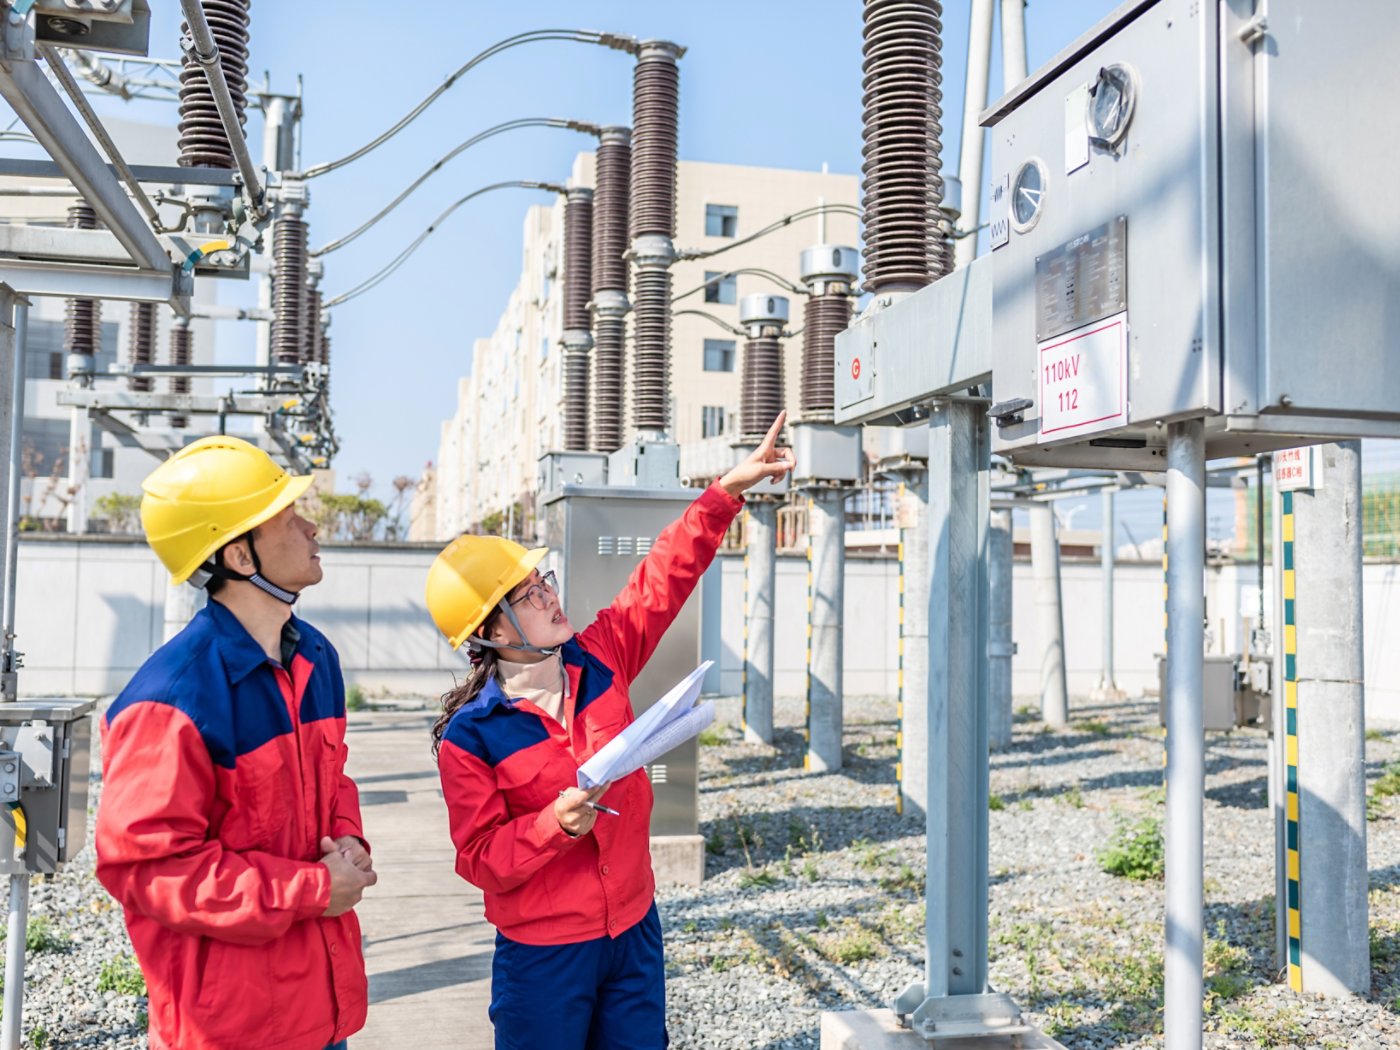 Power engineer checking electrical equipment at substation